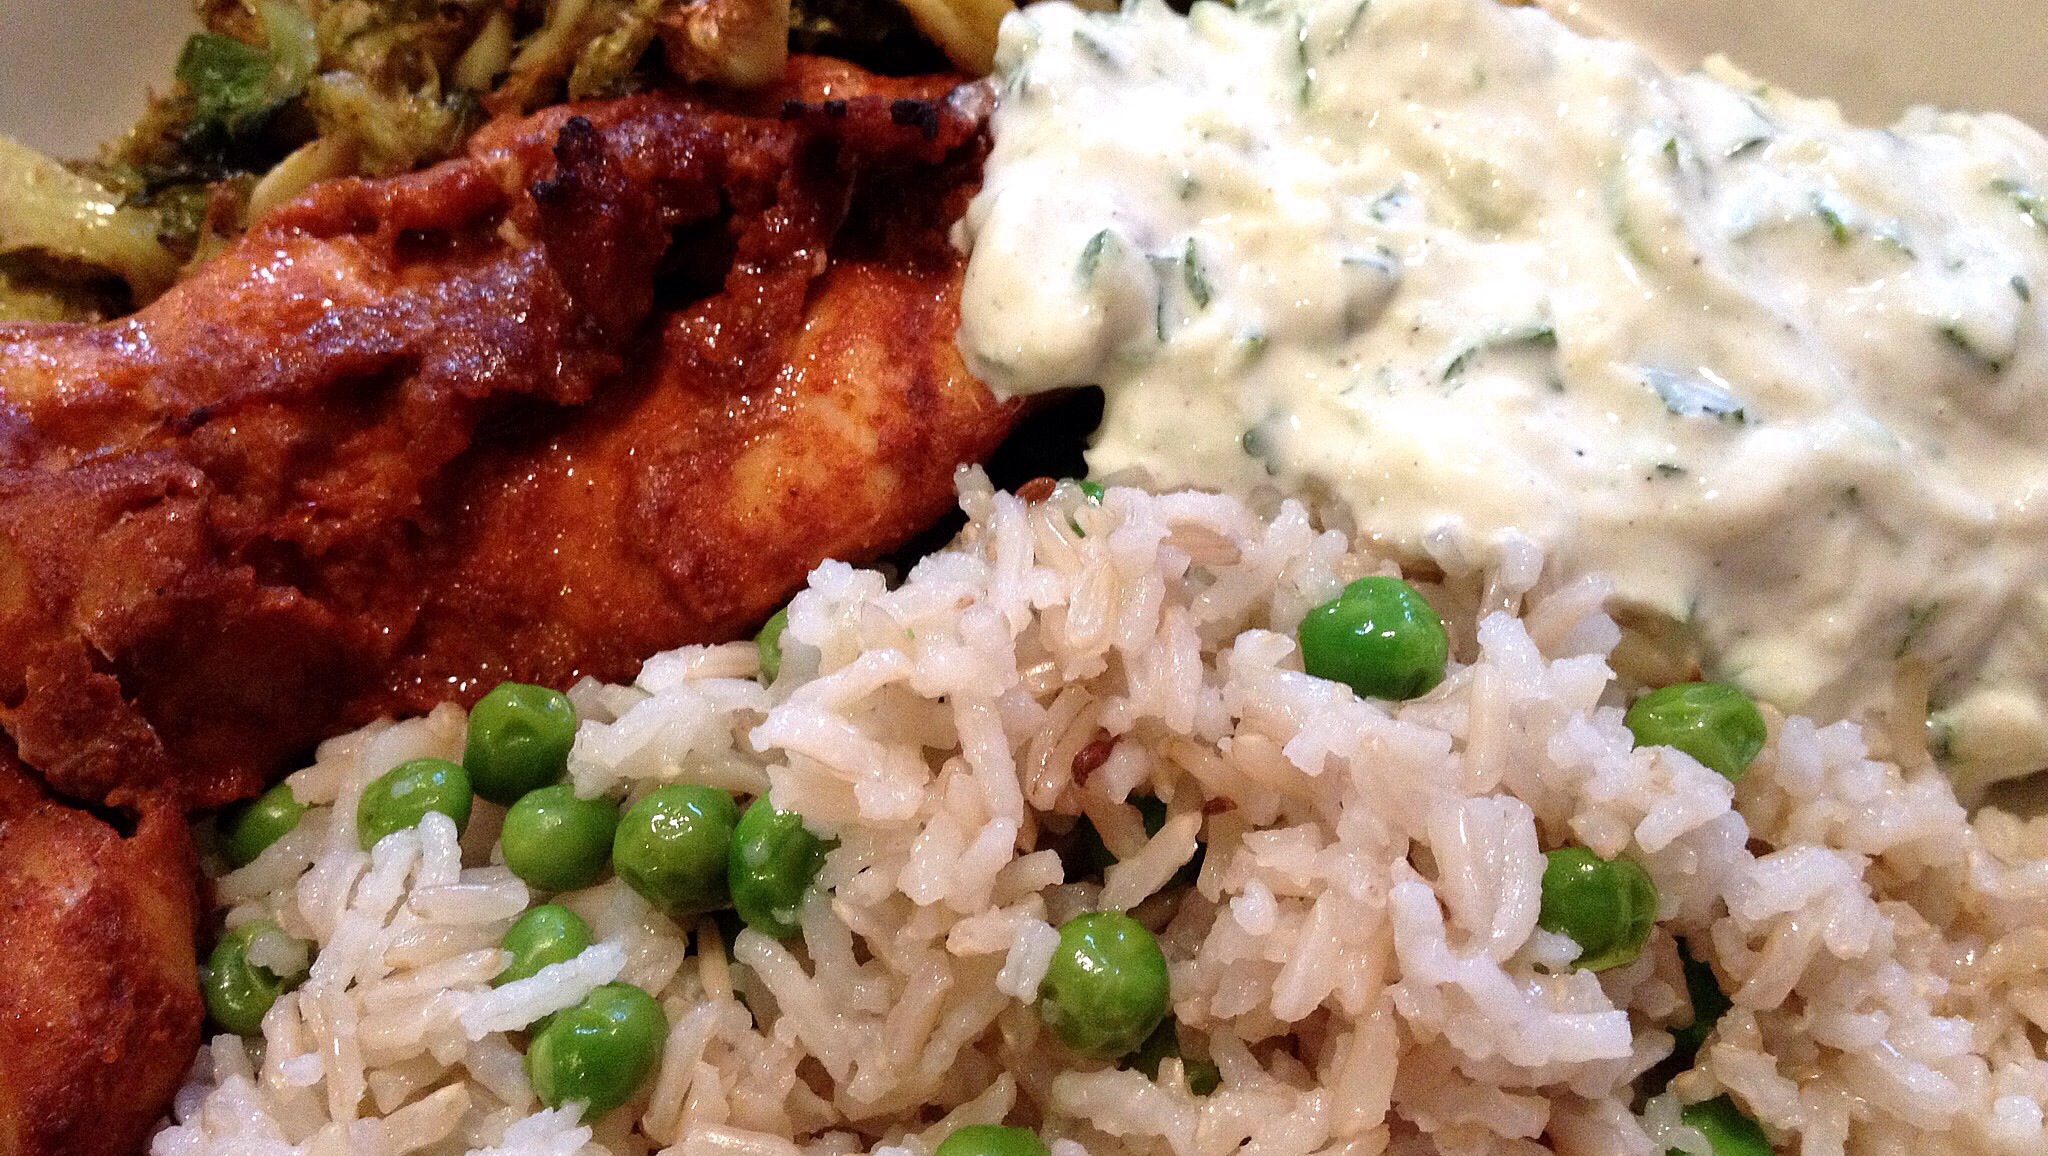 Zucchini & Mint Raita with Indian-style grilled chicken and steamed basmati rice with sweet green peas